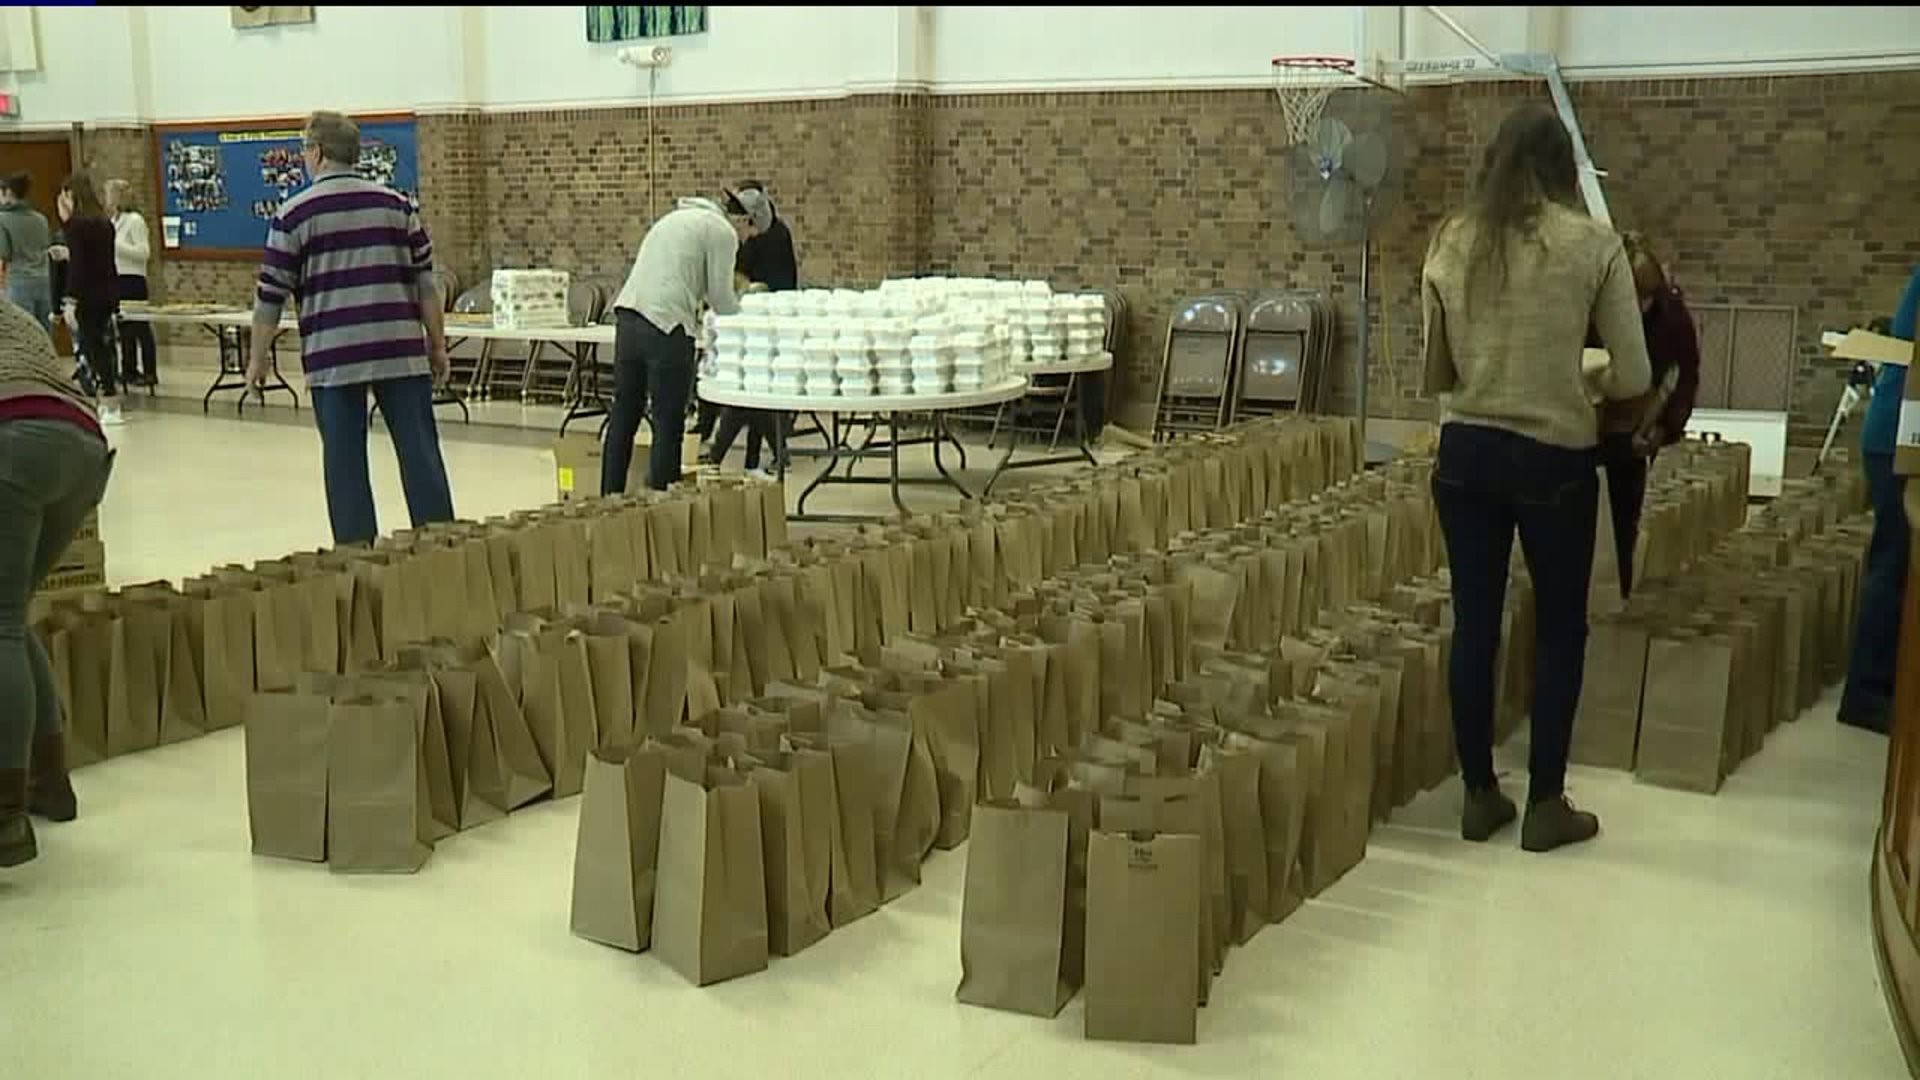 Delivering Meals on Thanksgiving Day, A Tradition in Luzerne County